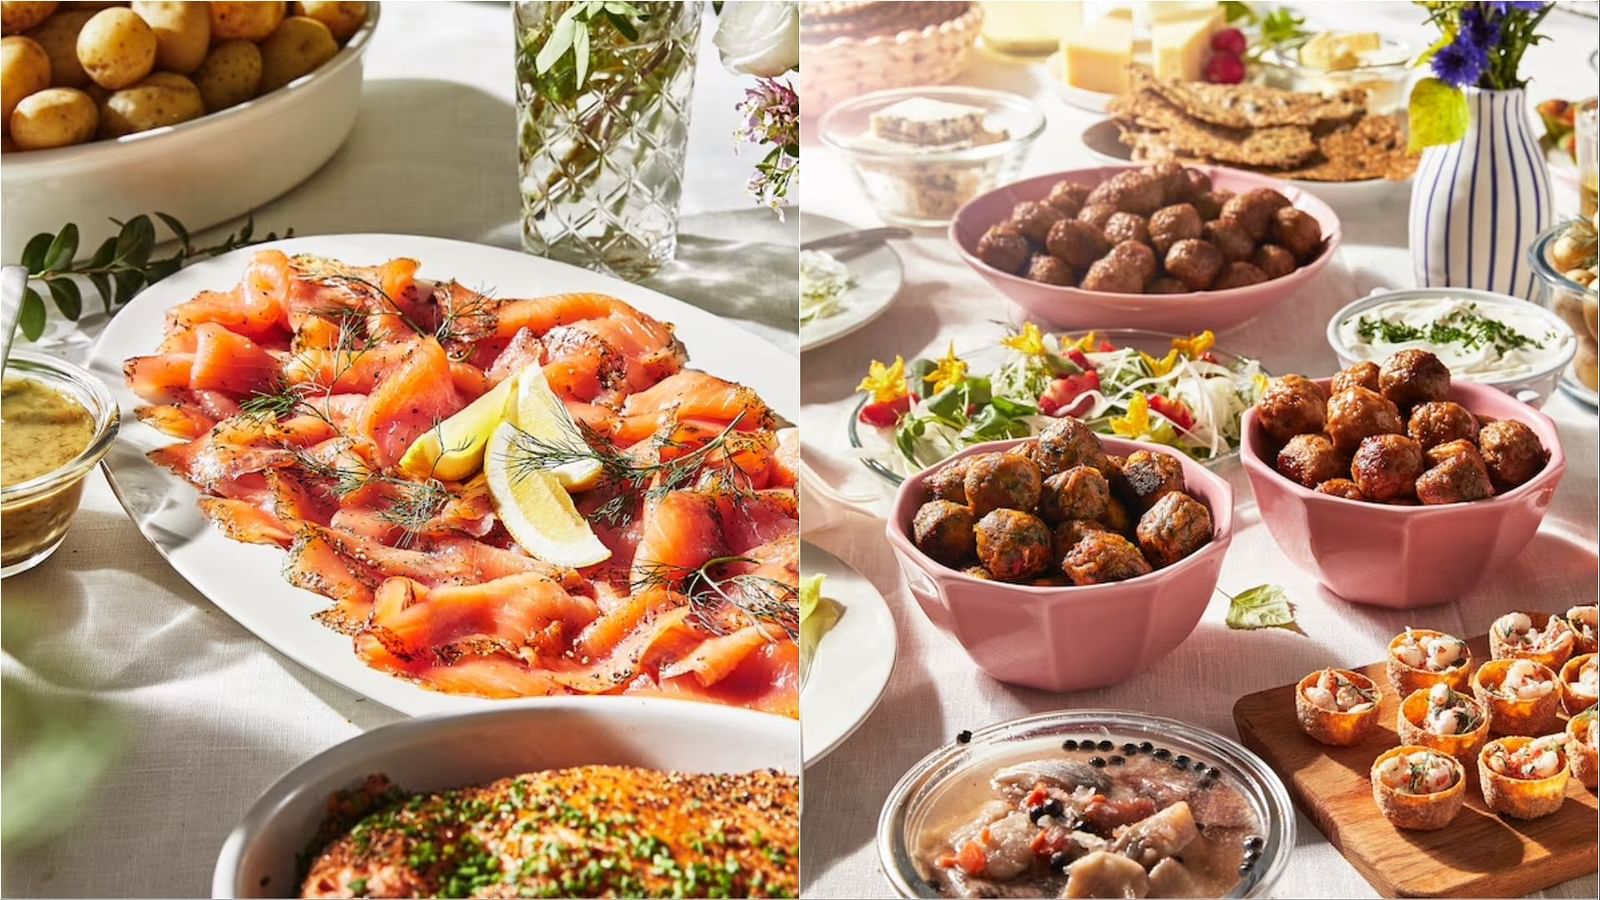 When will IKEA’s midsummer buffet 2023 start? Price, dates, and other